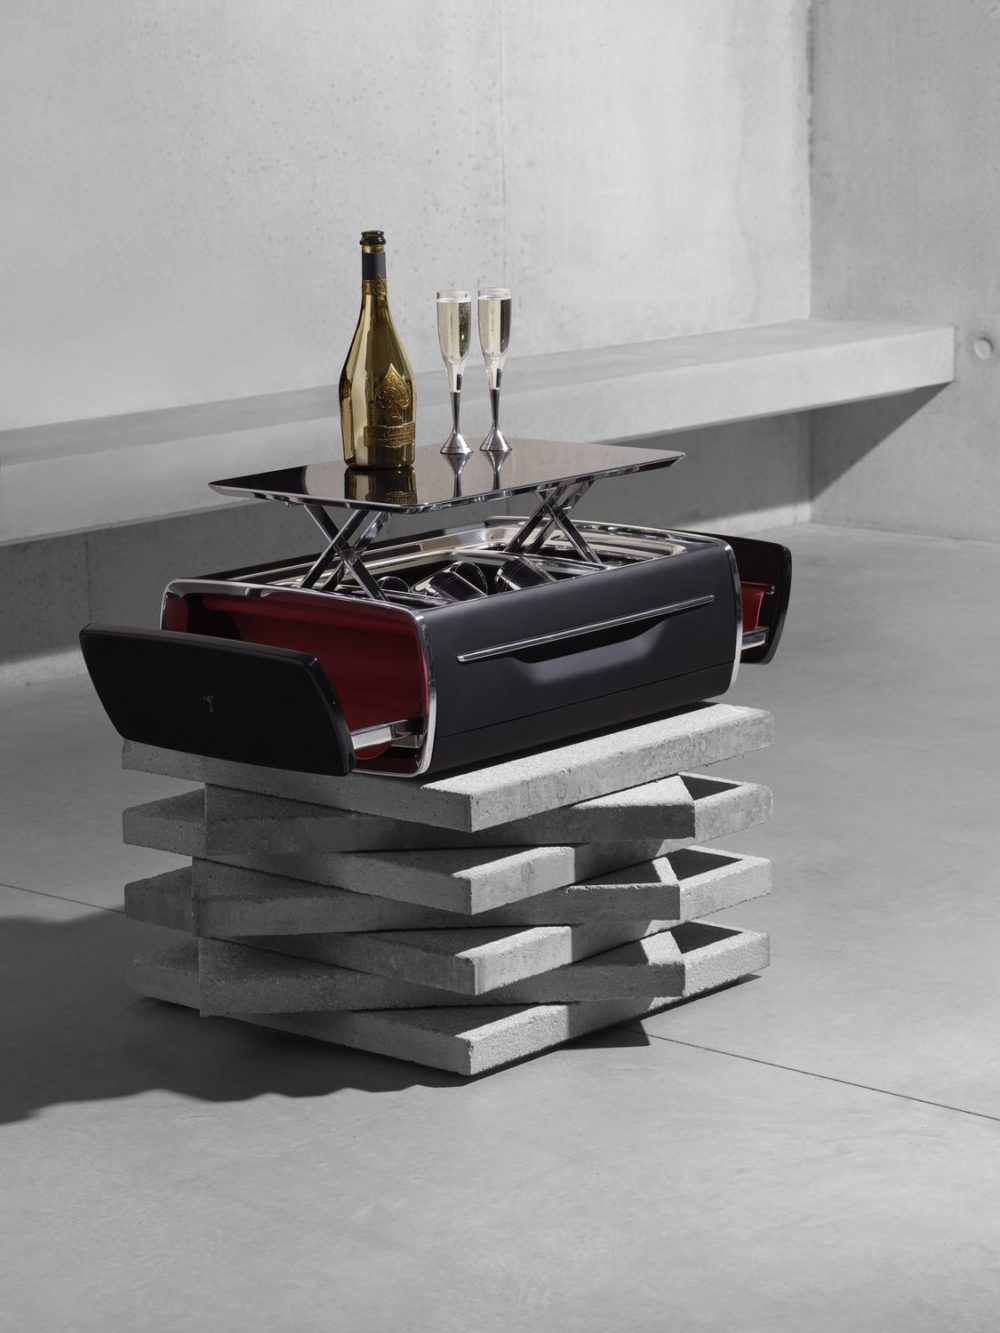 The champagne chest by Rolls-royce Motor Cars is an epicurean delight